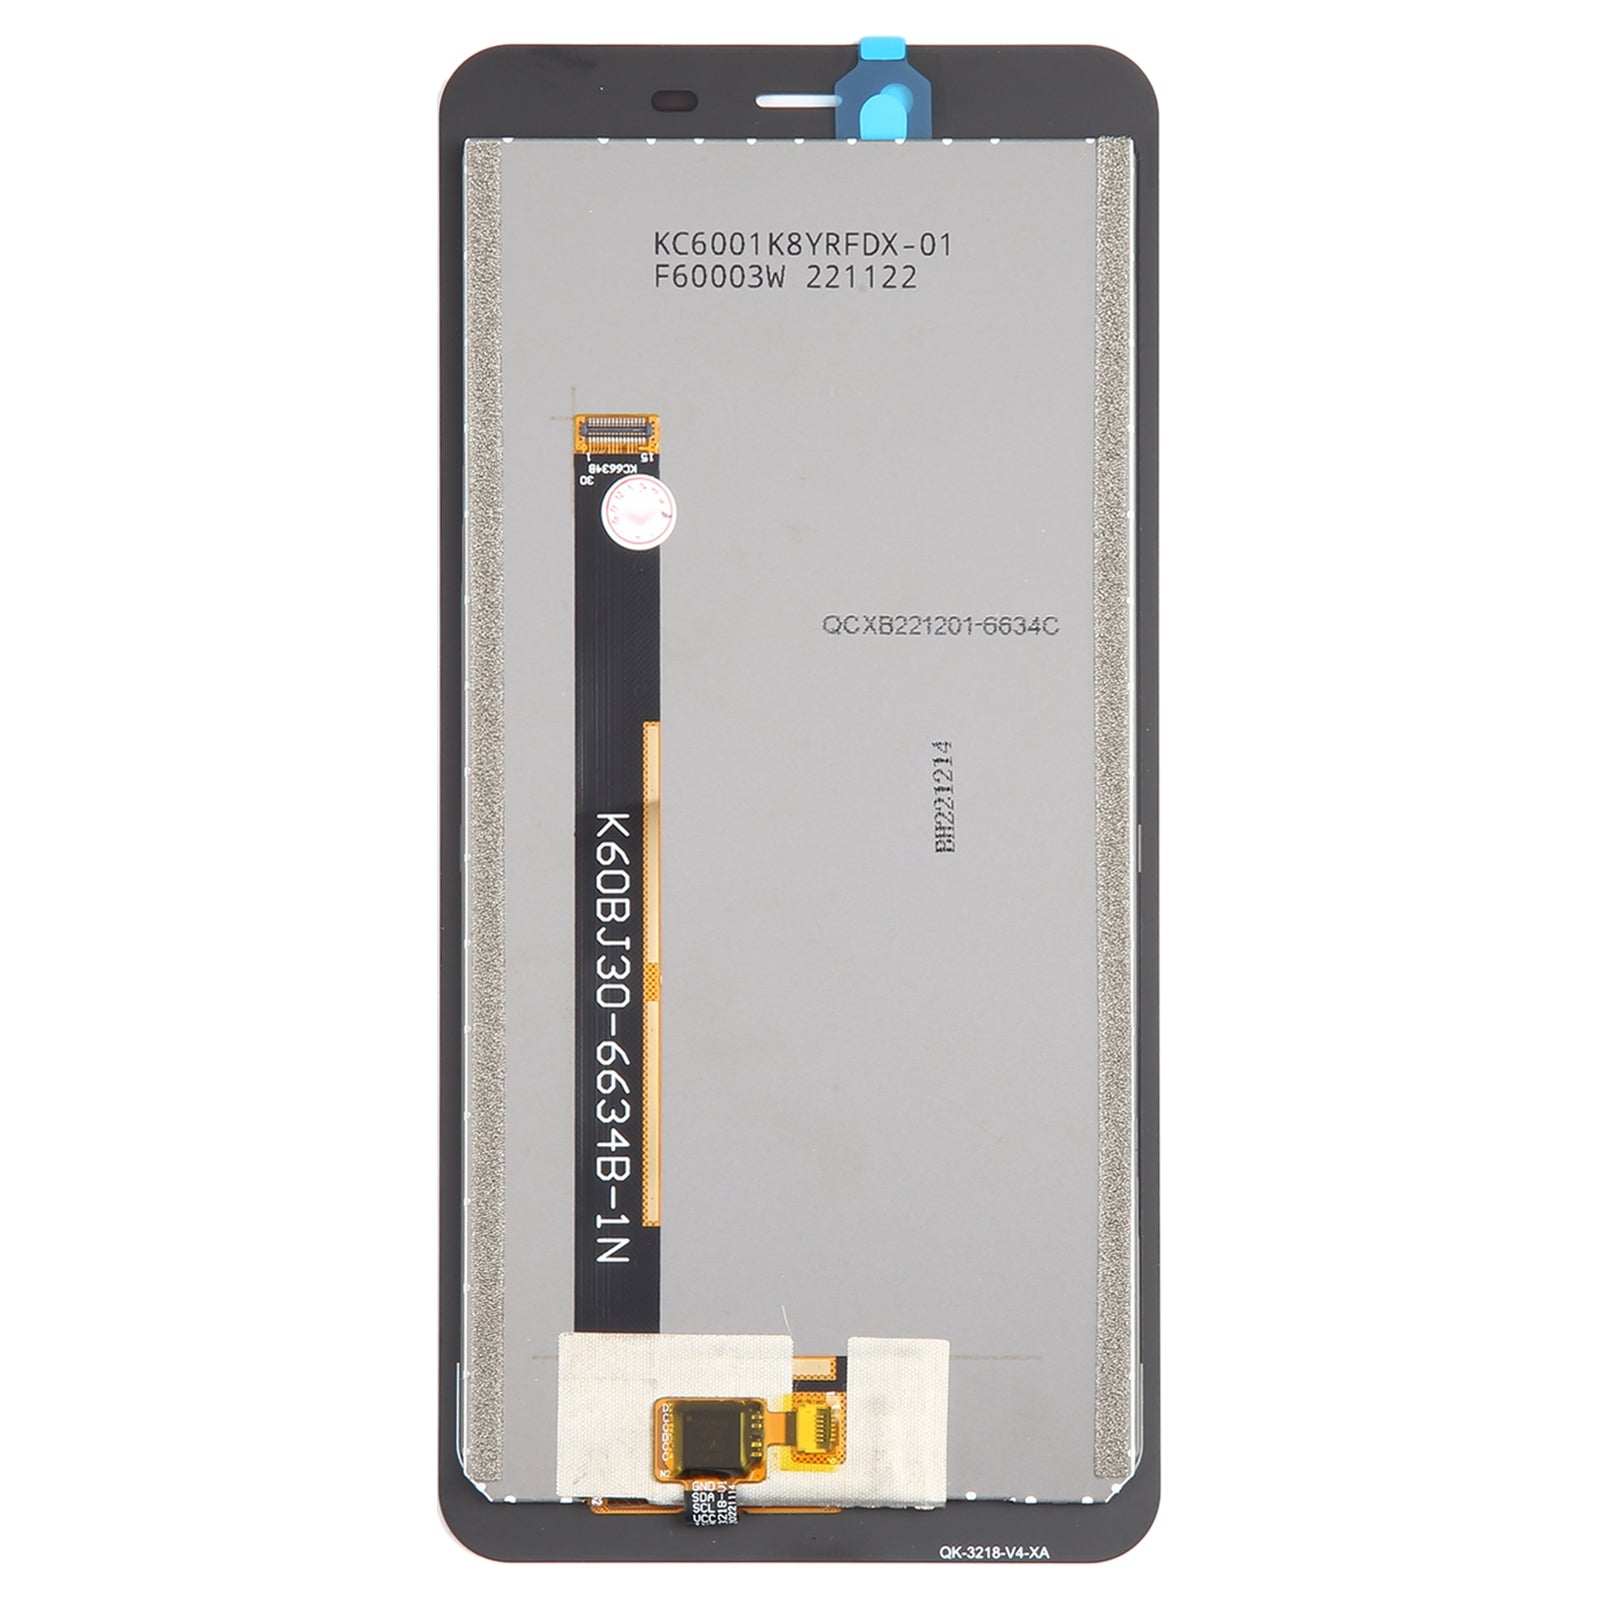 Hotwav T5 Pro LCD Screen and Digitizer Complete Assembly